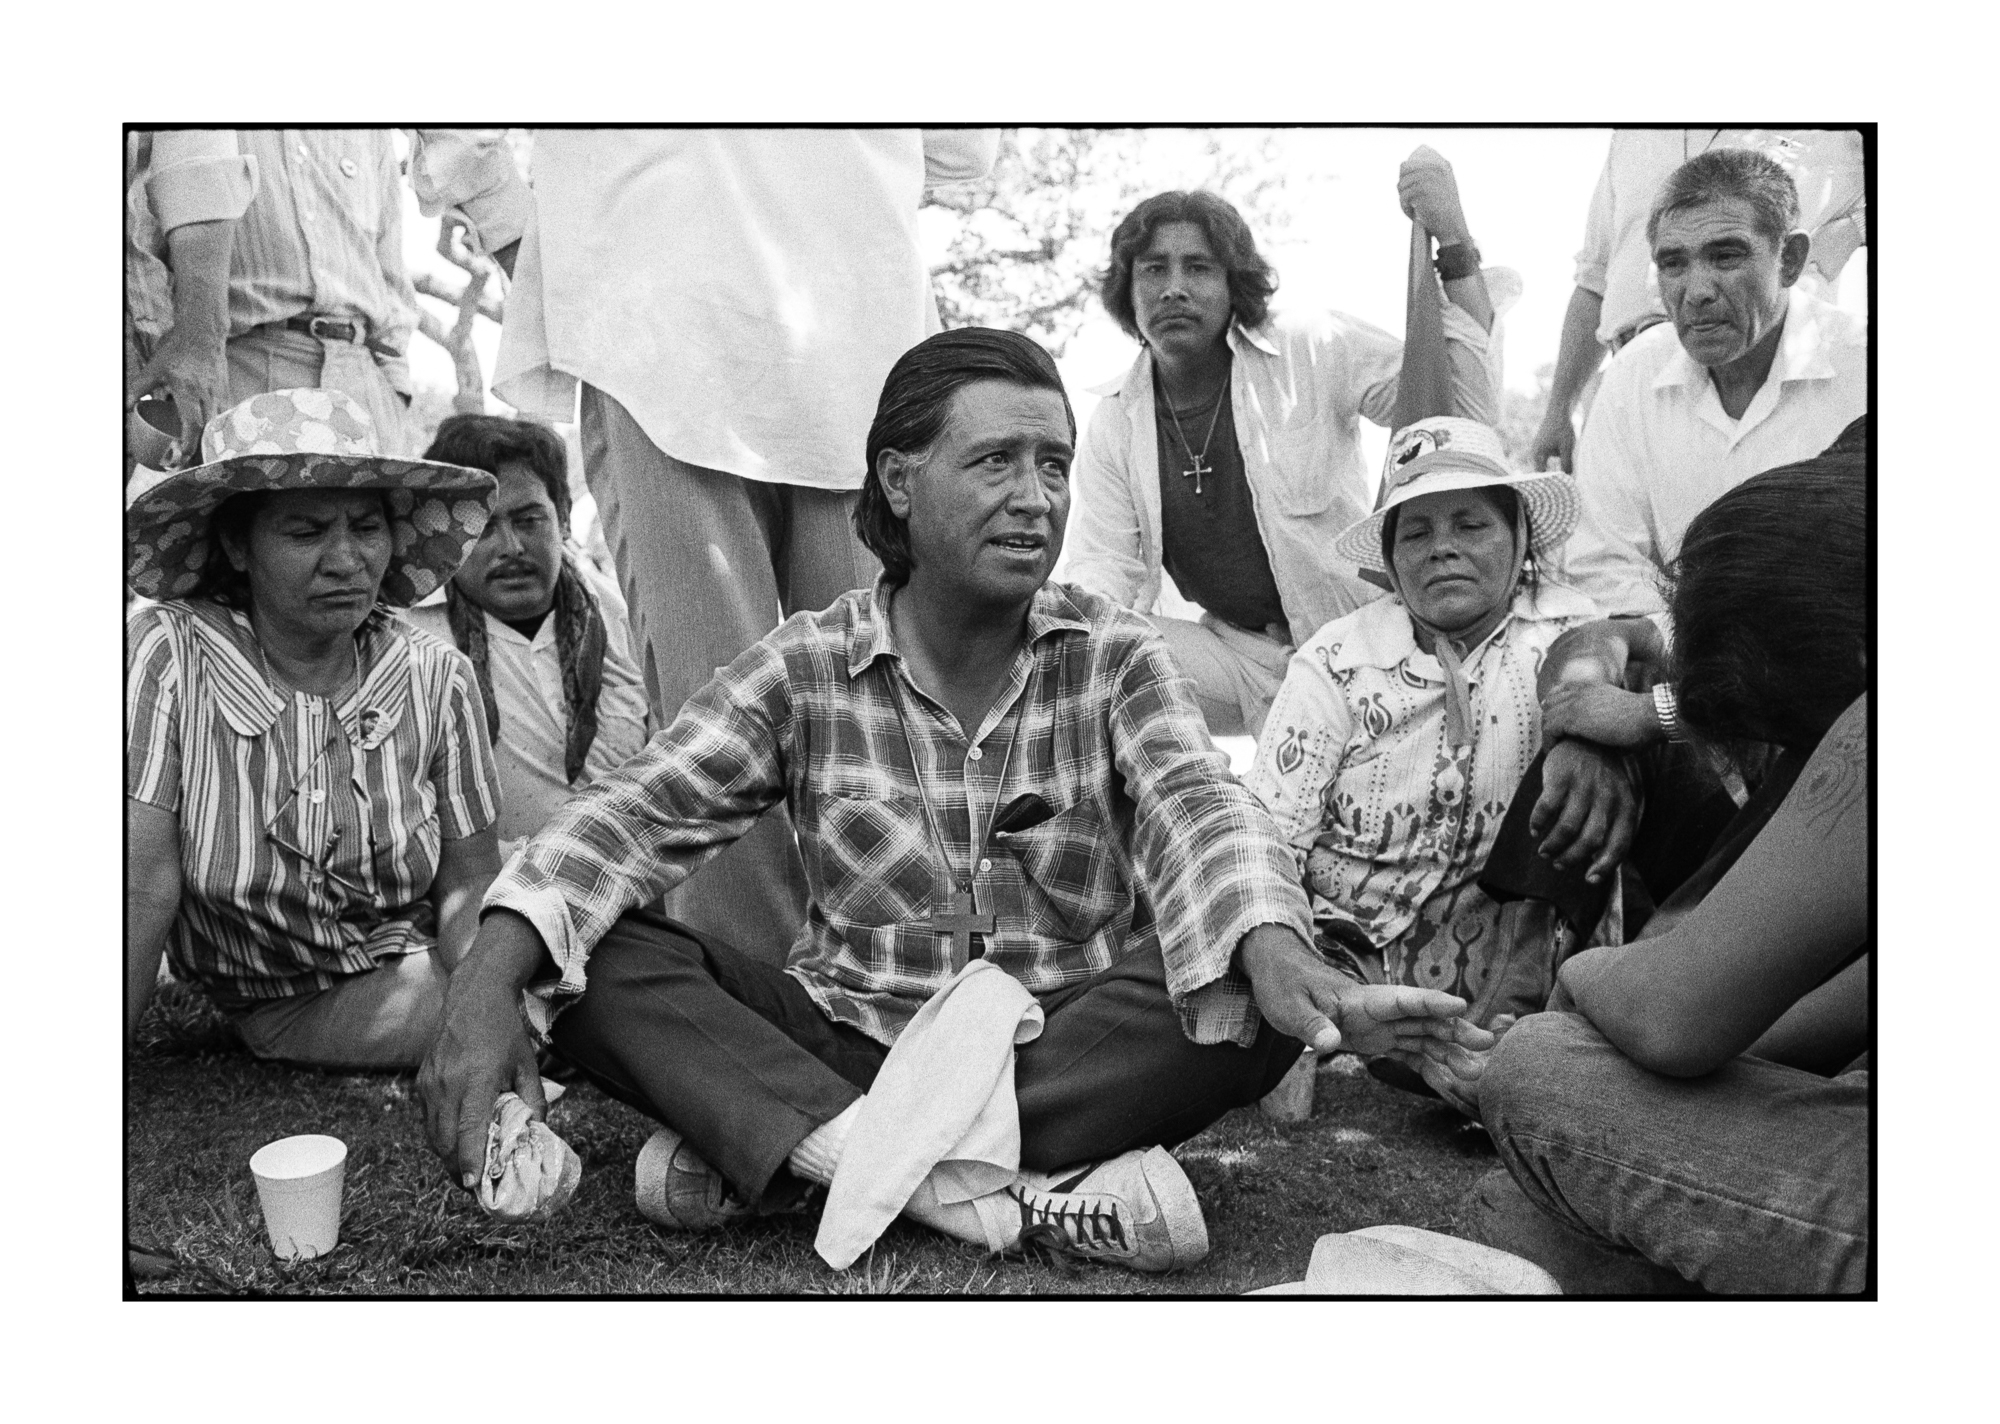  In 1974-75, I traveled up and down the valleys of California photographing the young men living in farm labor camps, the children and adults working together in the fields, and the United Farm Workers Union (UFW) organizers, with Cesar Chavez, talki